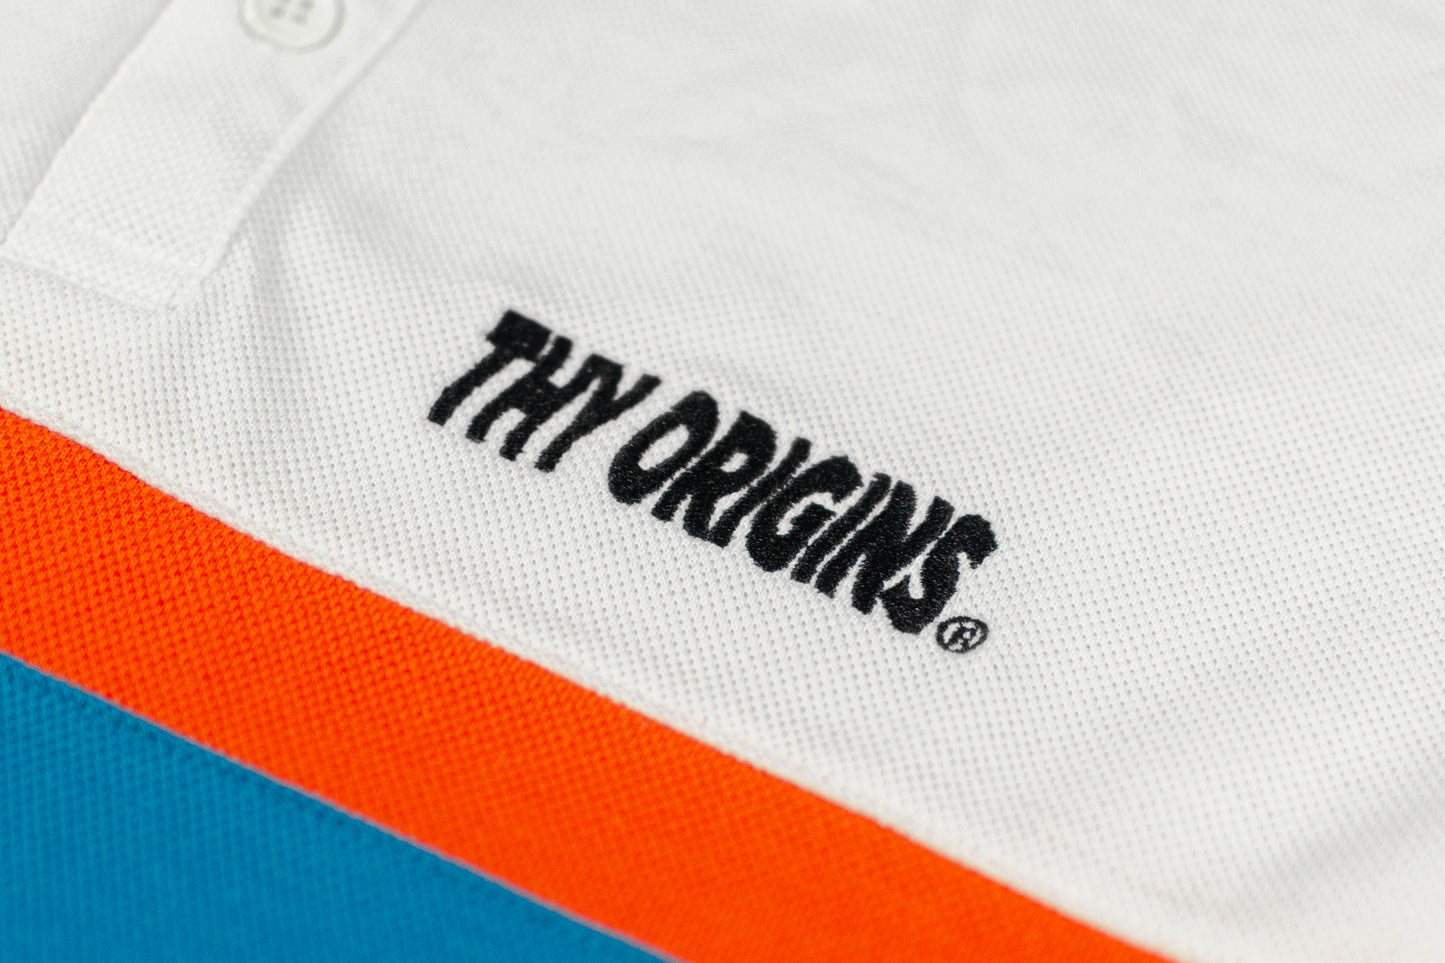 Rugby Long-sleeves (White Knicks)